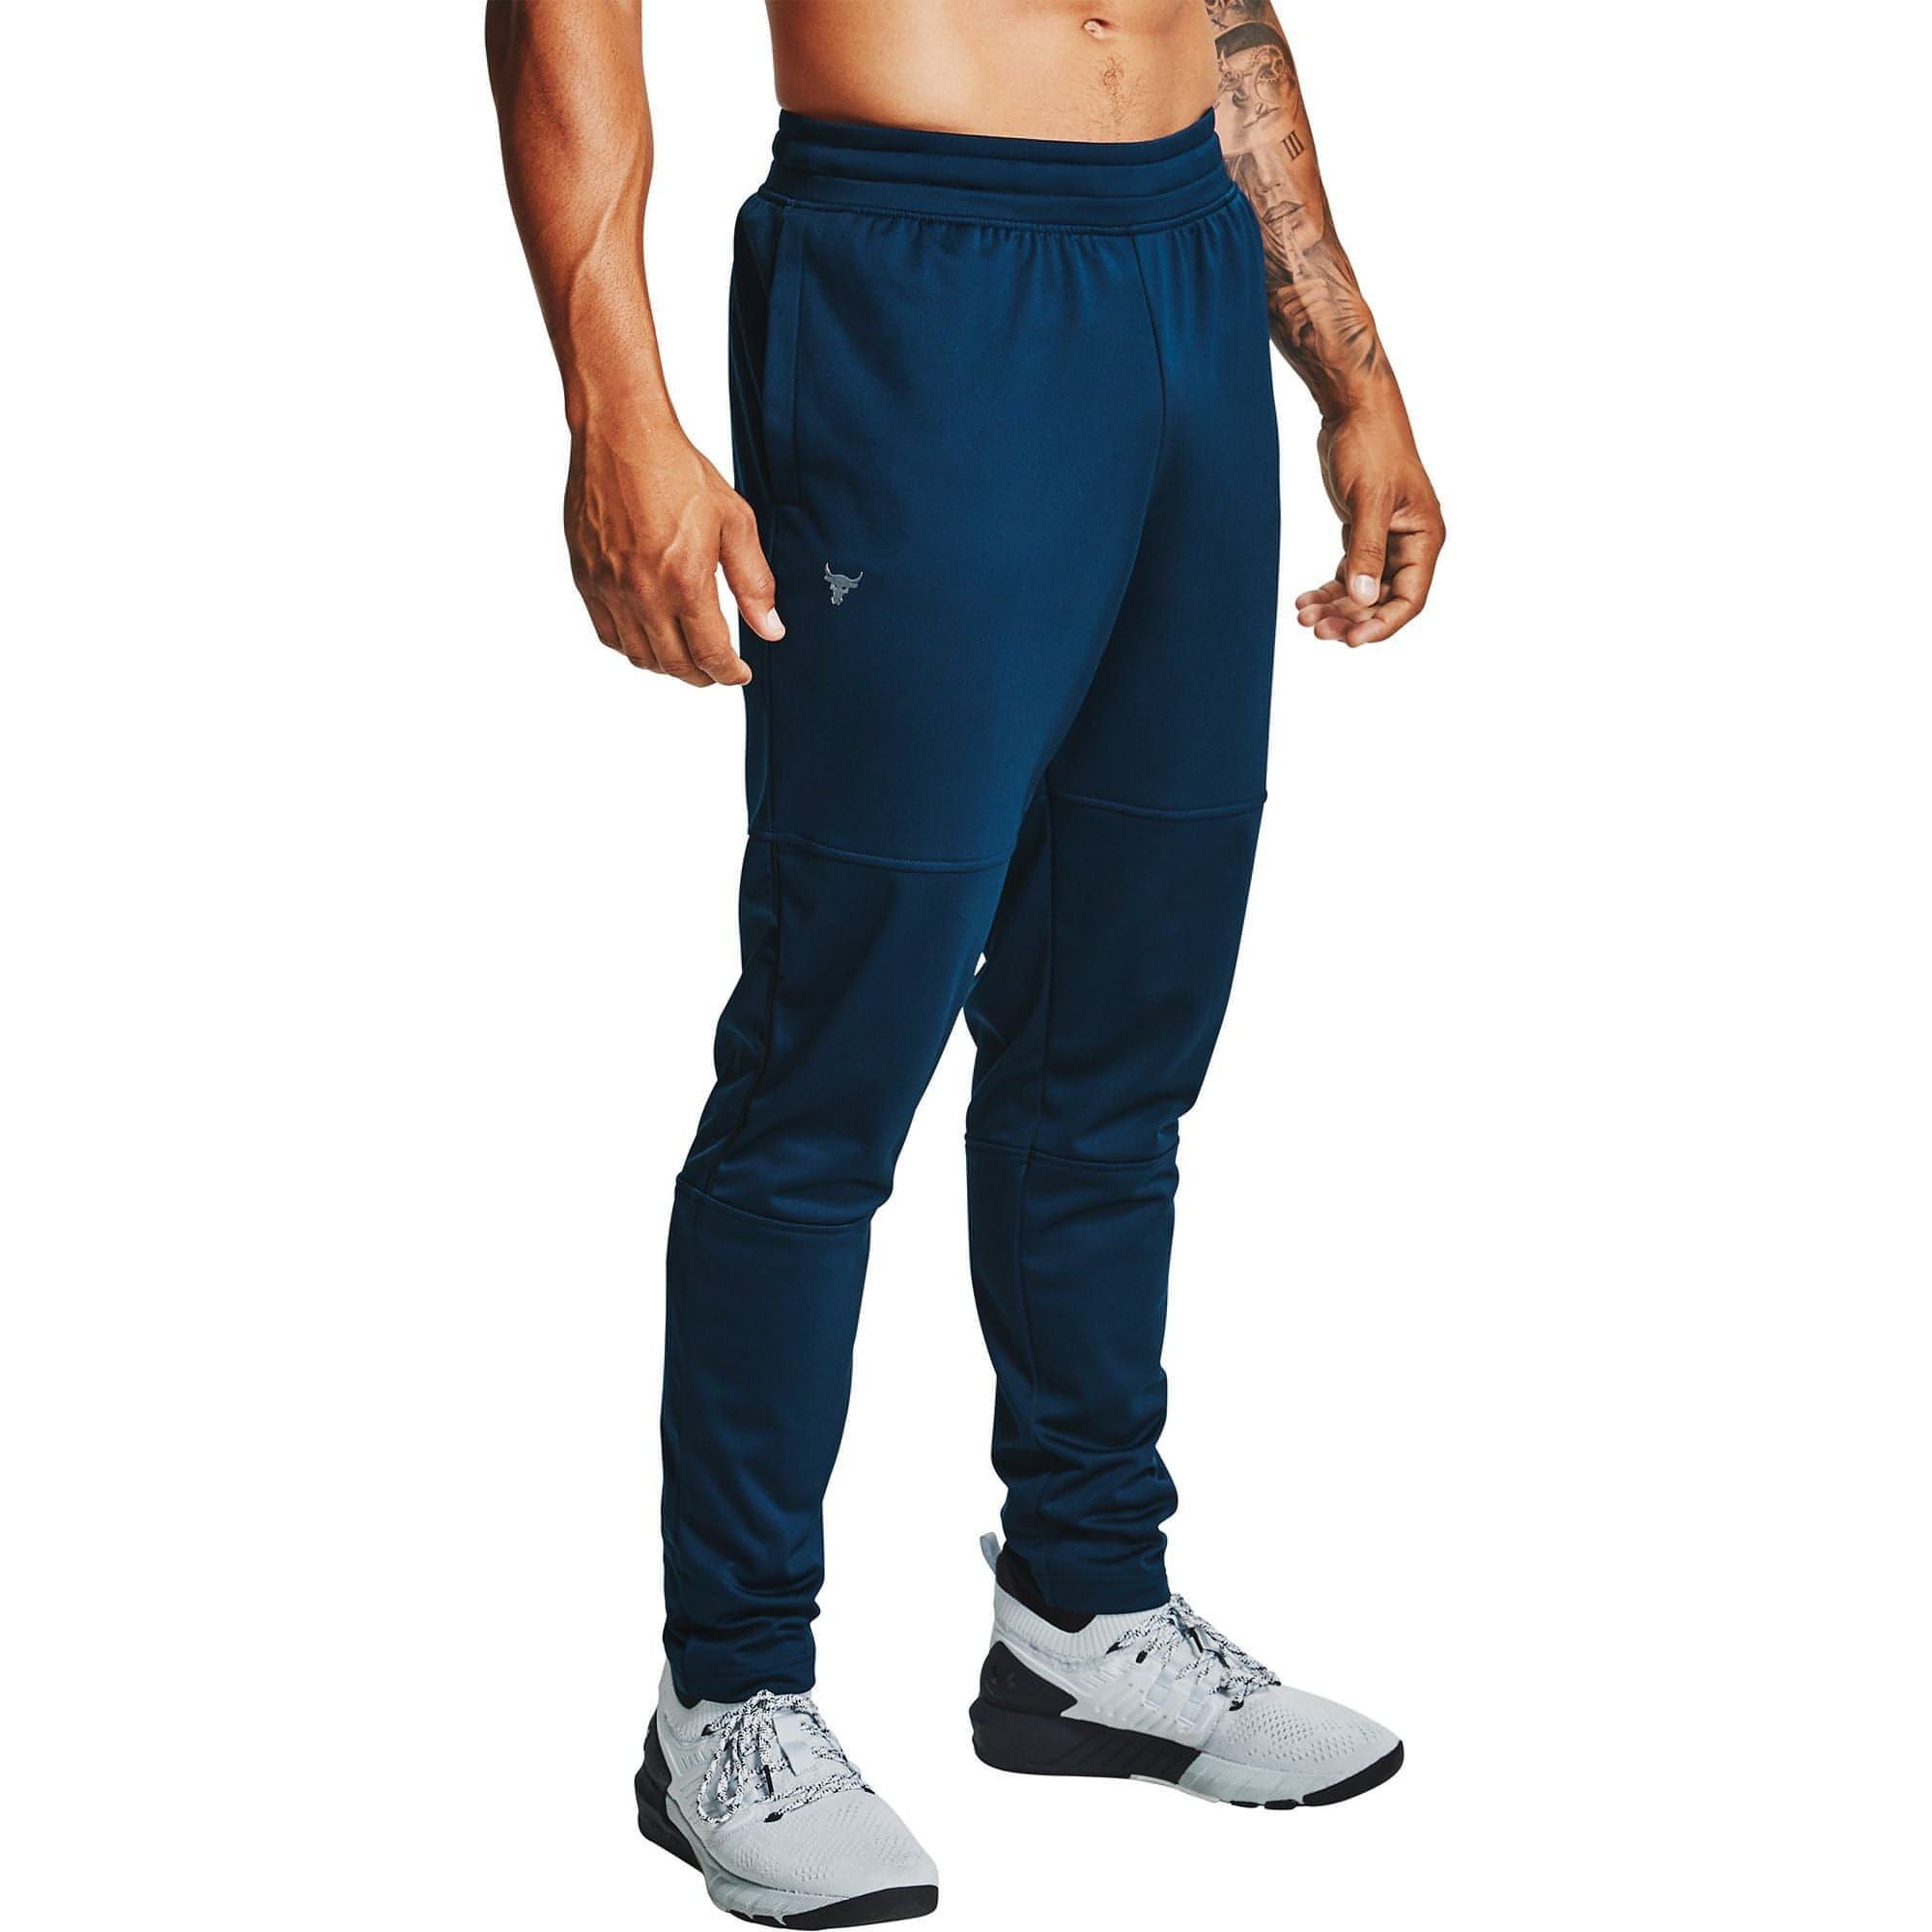 ASI Rock Air Force Lower for Men - Anand Sports Industries